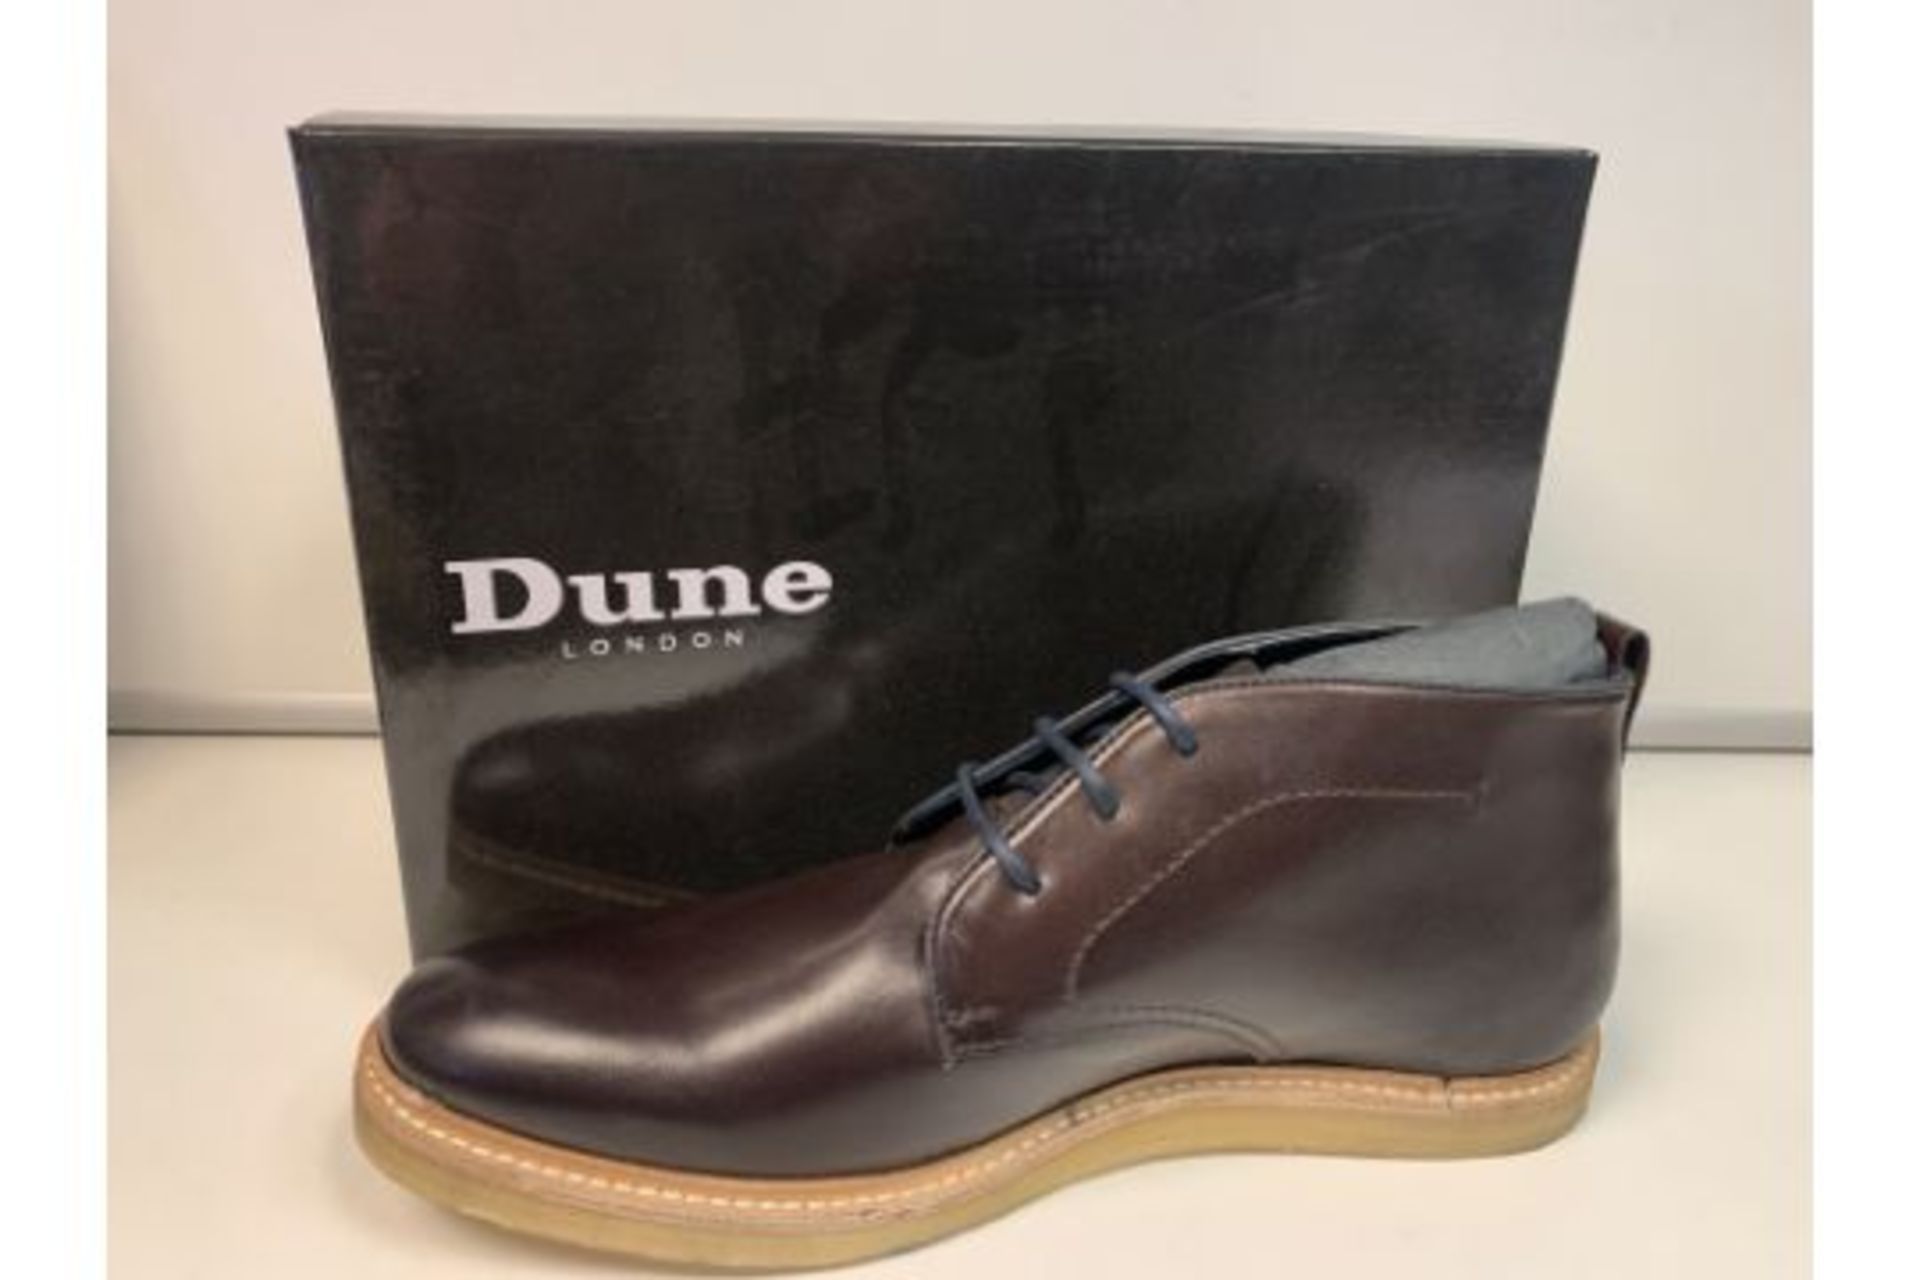 DUNE LONDON DARK BROWN LEATHER CREPE SOLE CHUKKA BOOTS SIZE 6 RRP £105